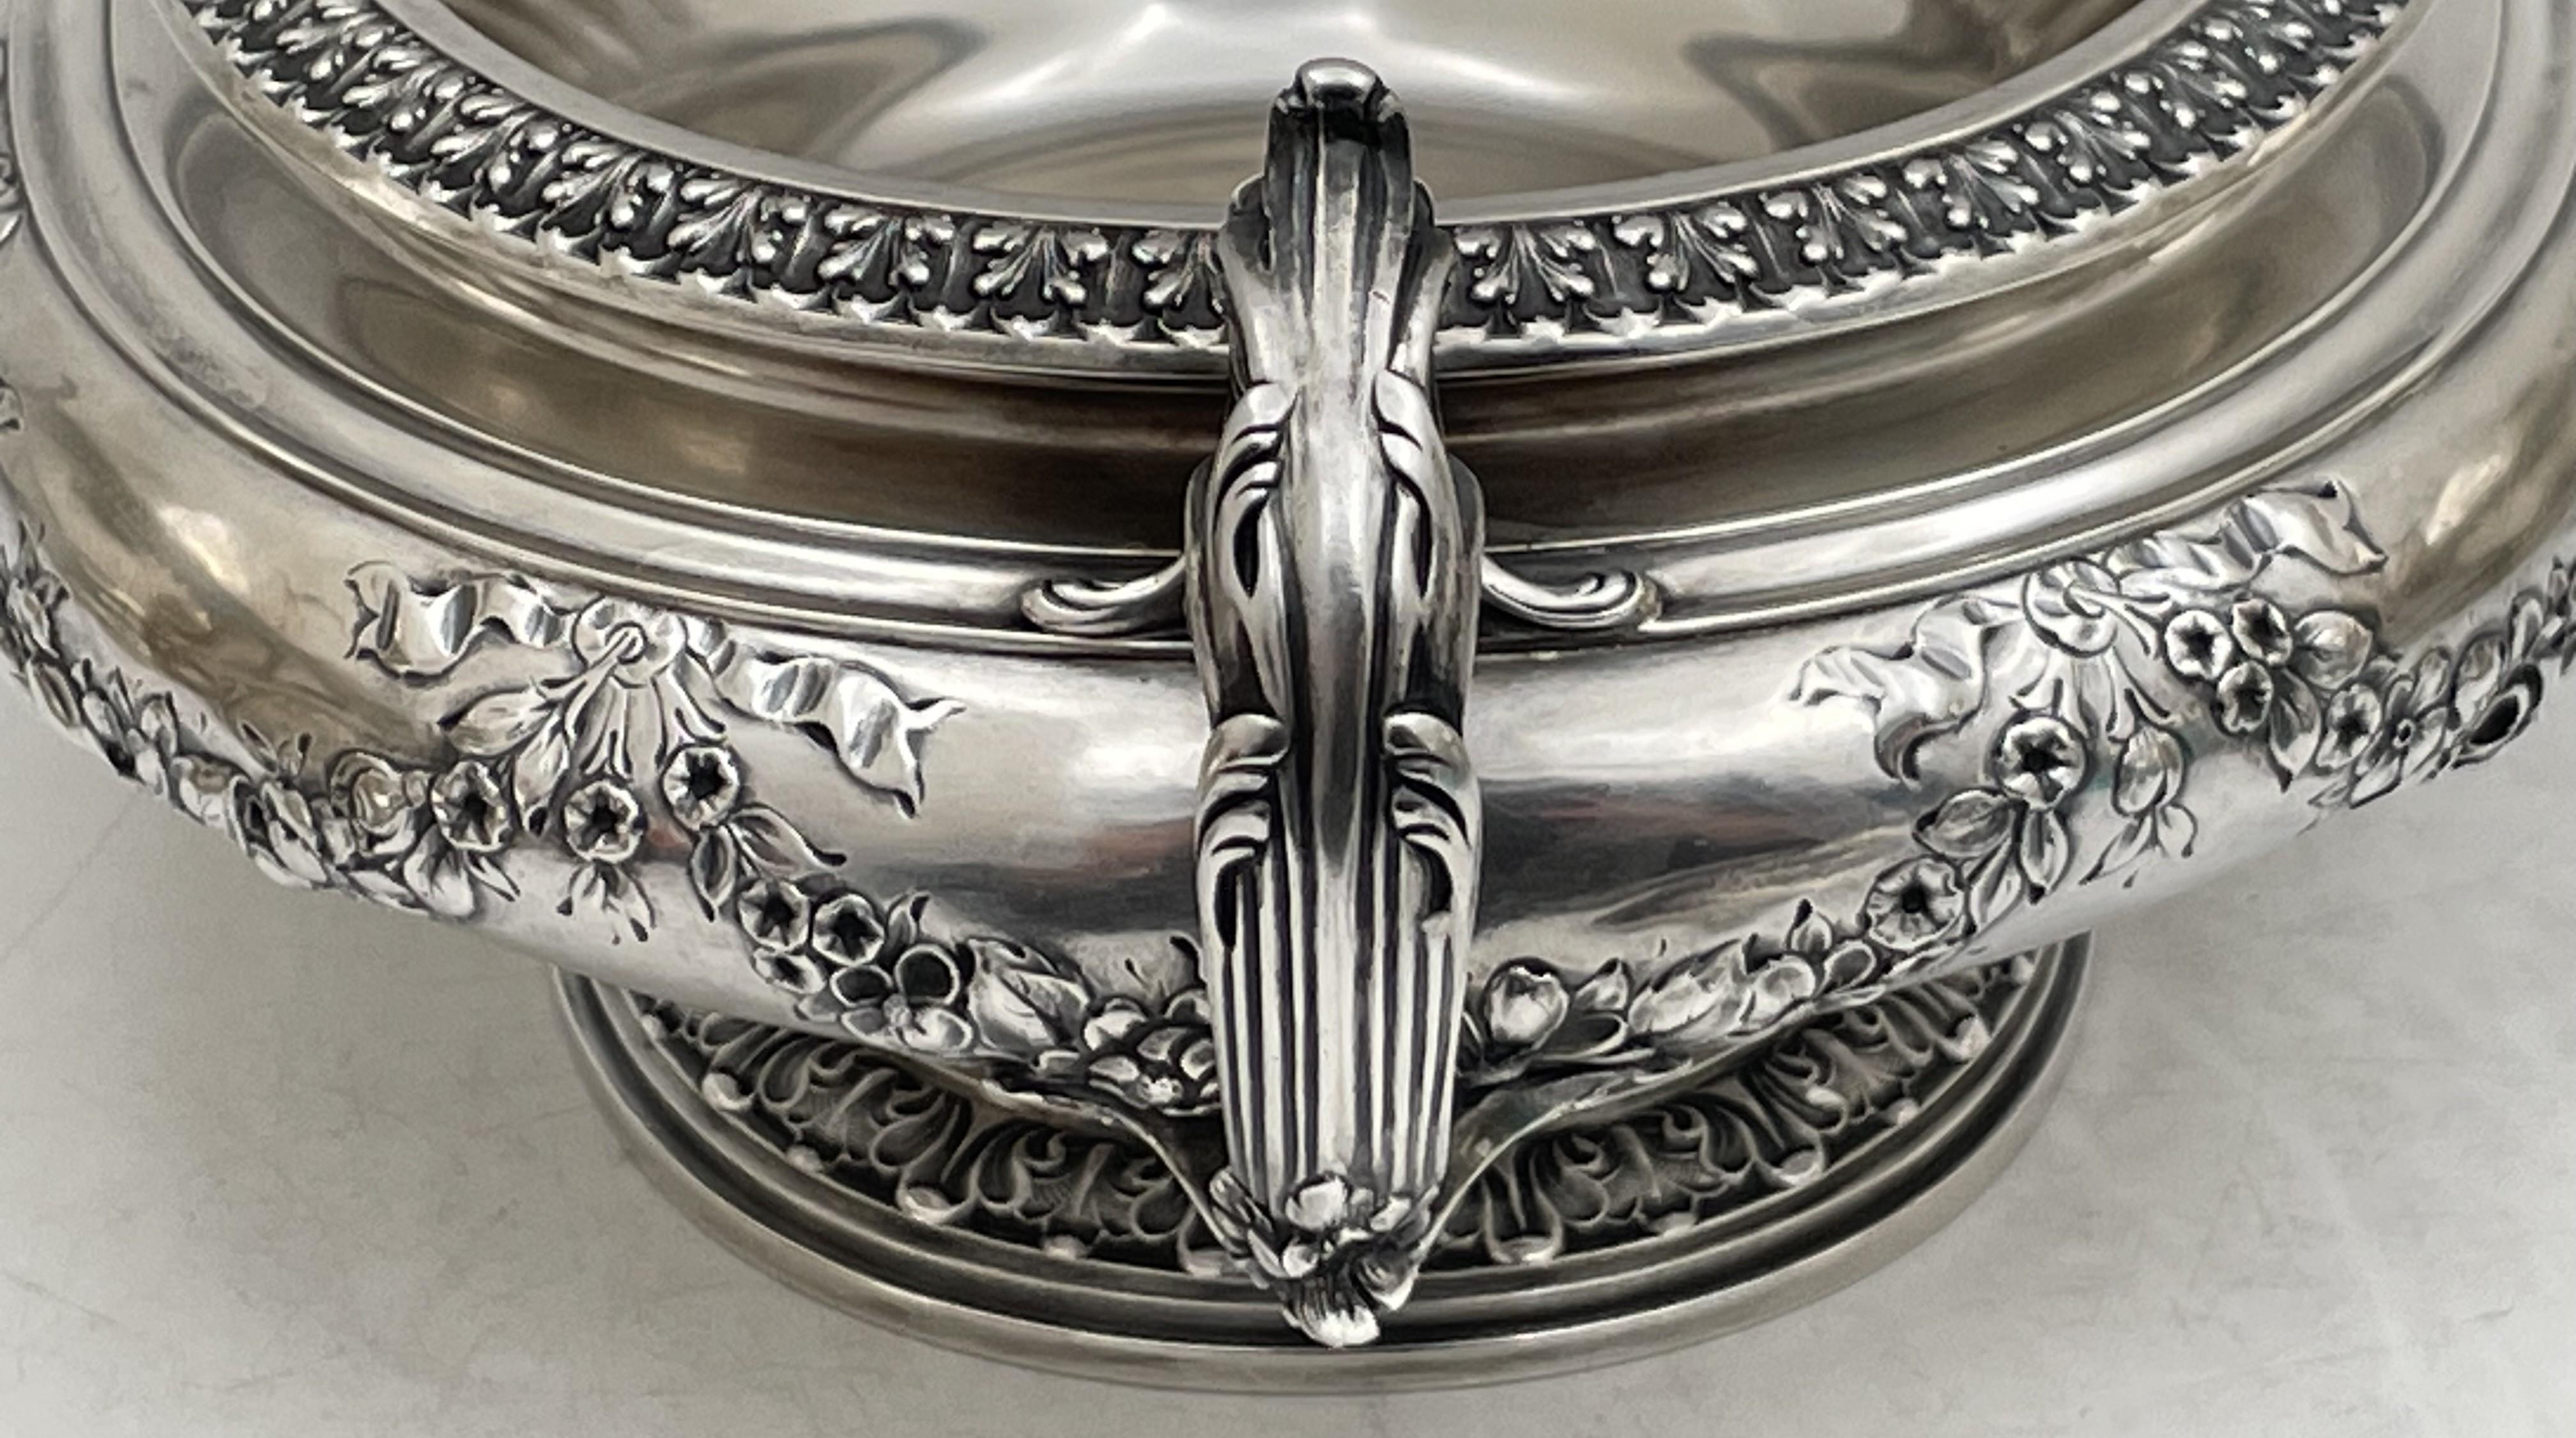 Late 19th Century Gorham Sterling Silver 1898 Two-Handled Tureen/ Covered Bowl Art Nouveau Style For Sale